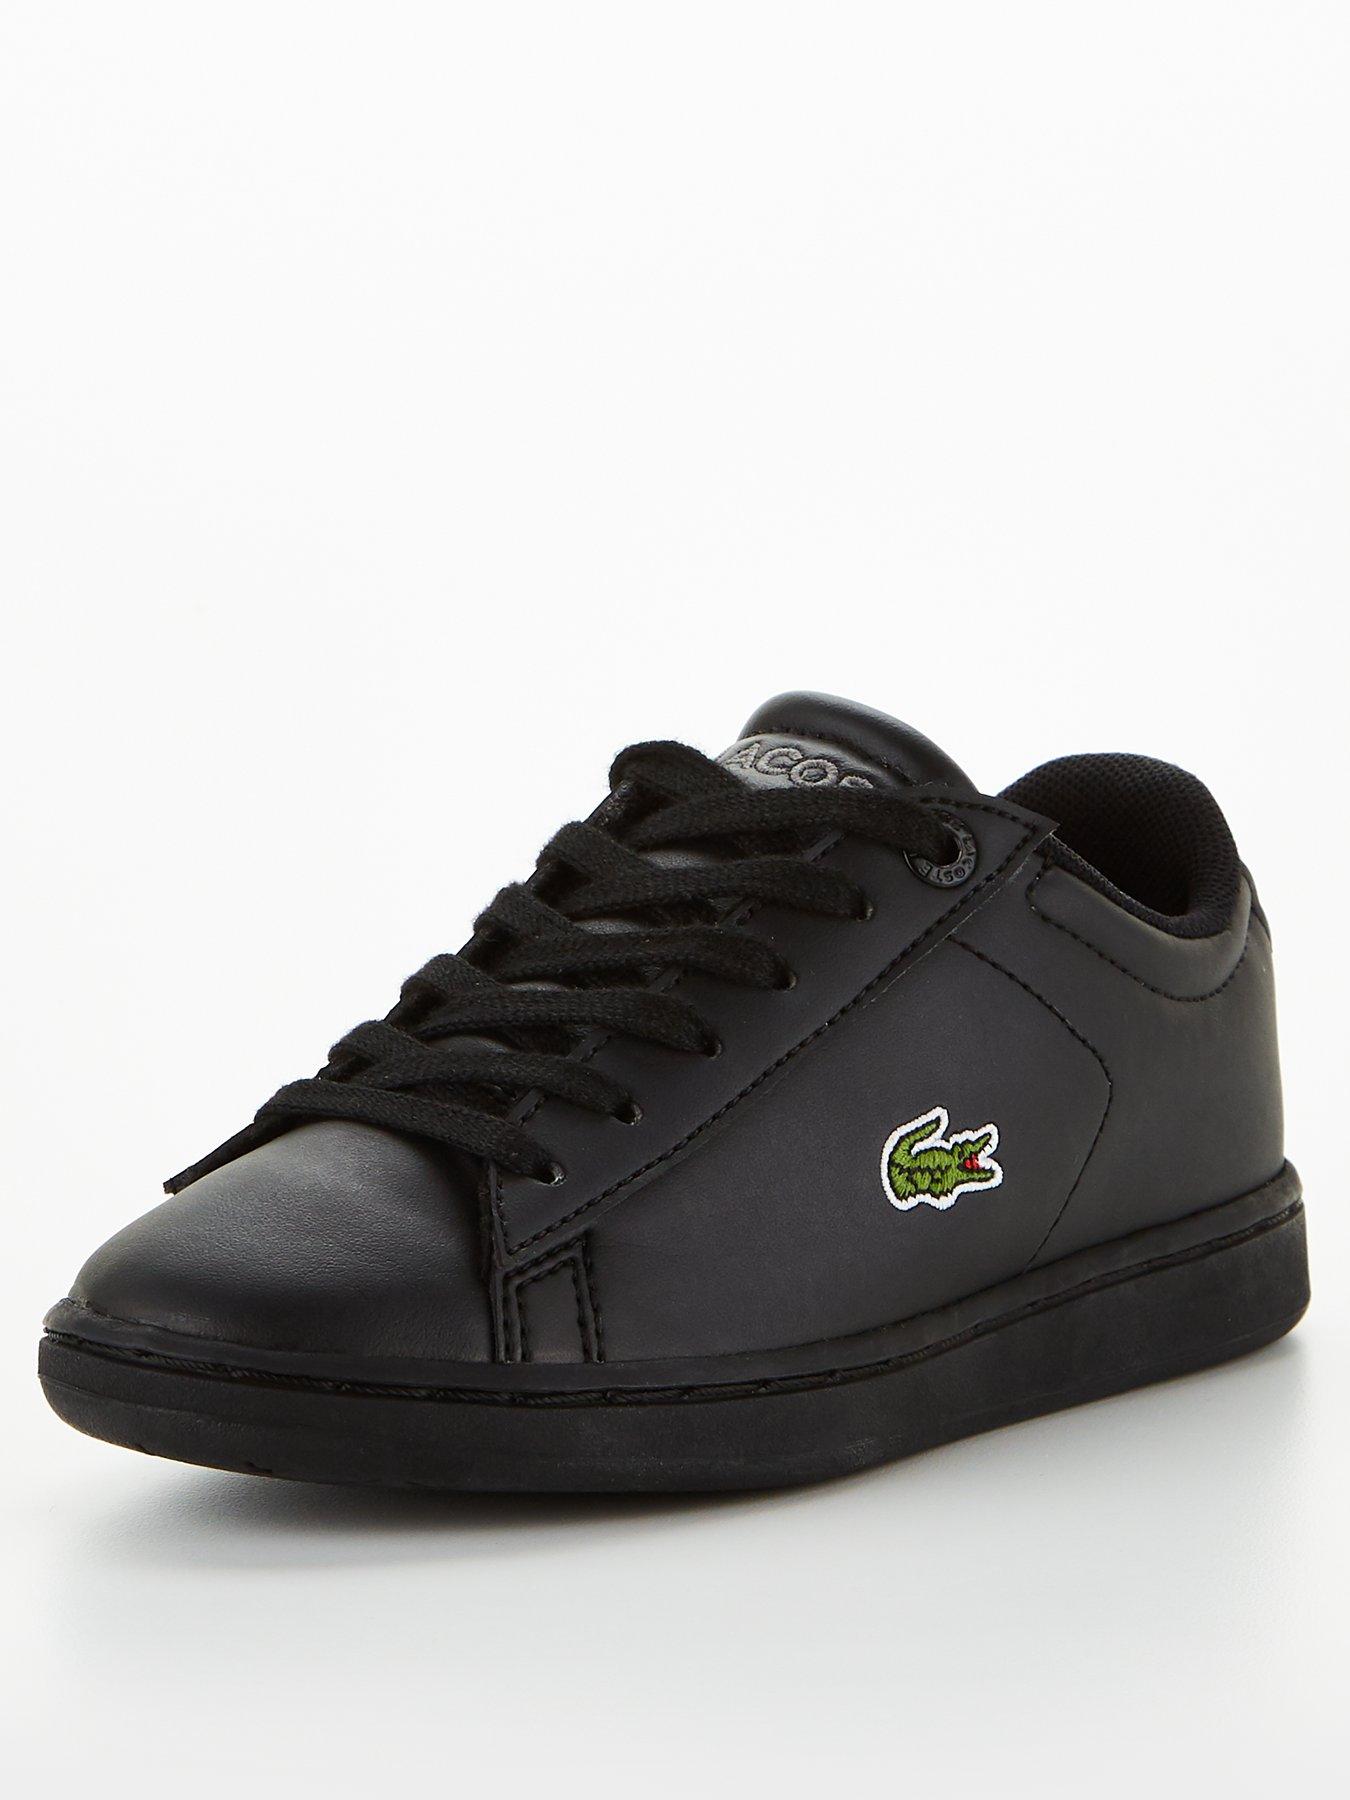 Trainers Carnaby Evo Bl 21 Trainer